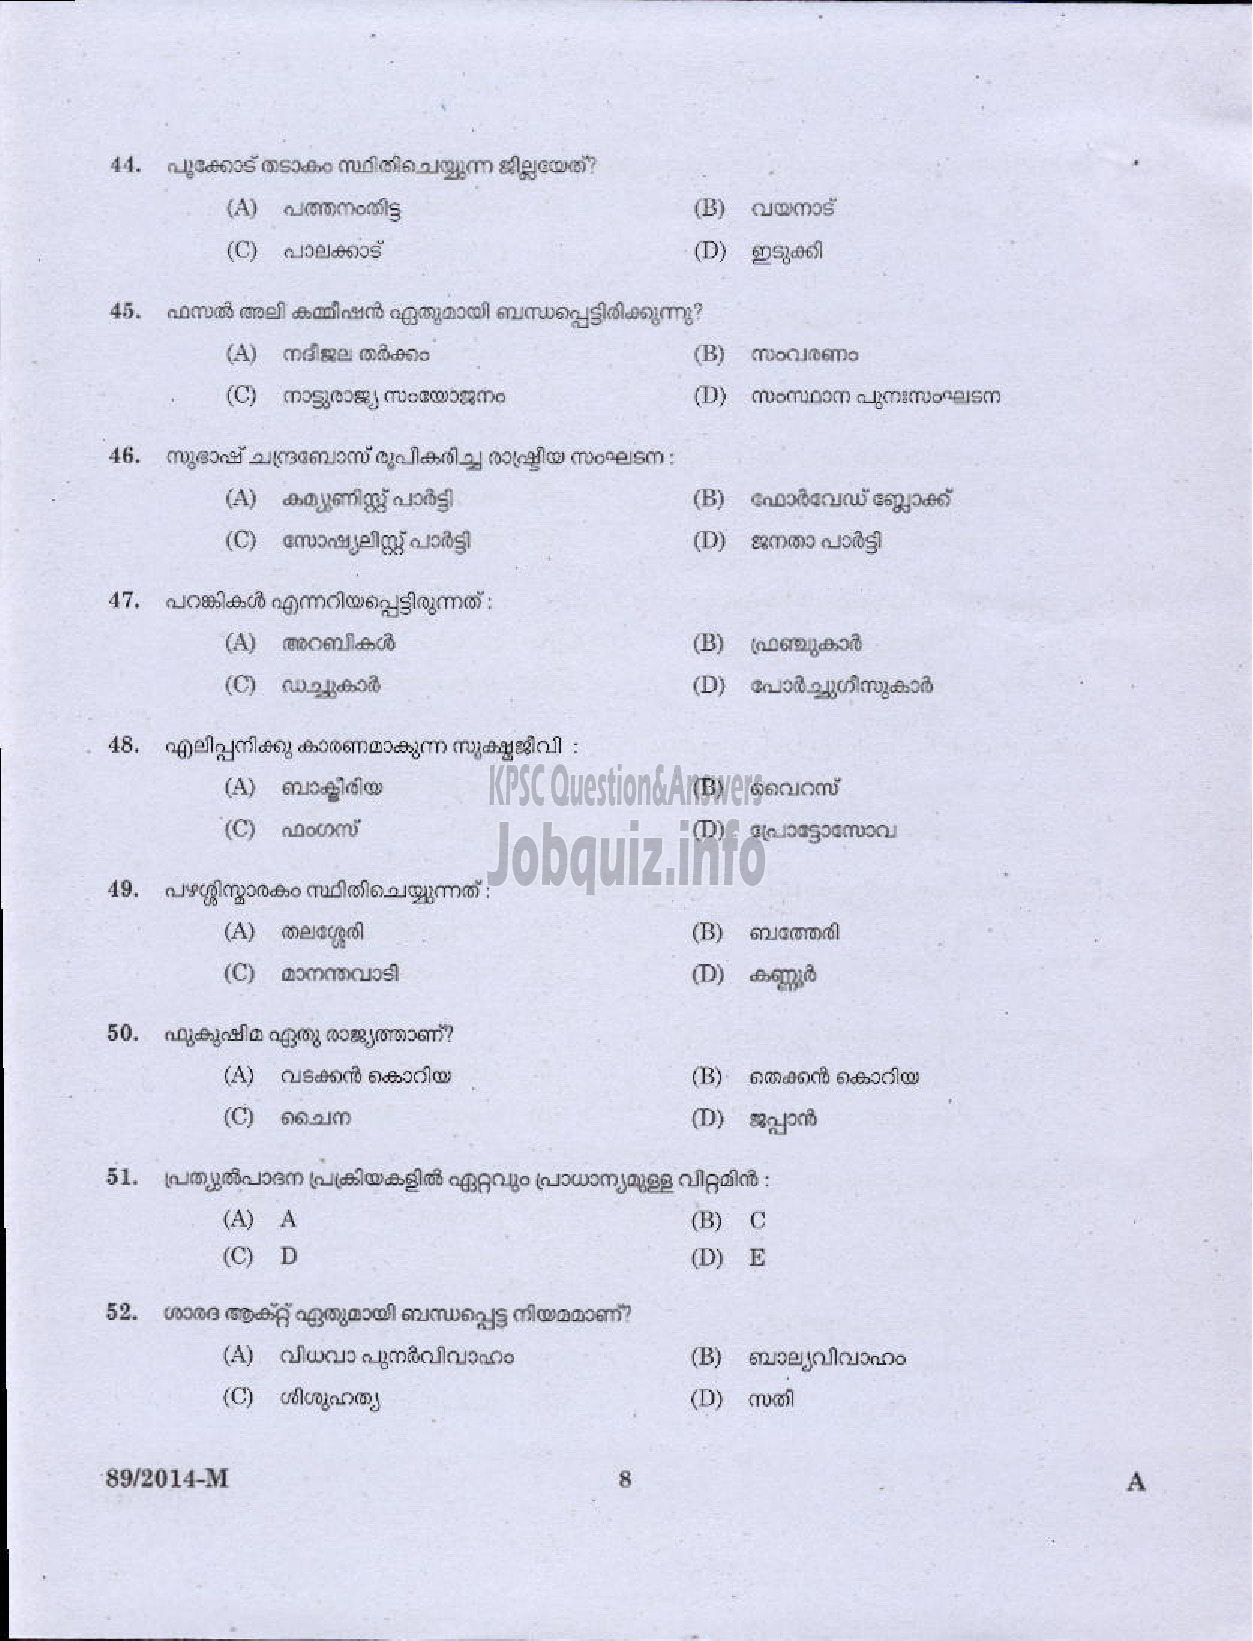 Kerala PSC Question Paper - ATTENDER SR FOR ST ONLY TCC LTD AND LGS NCA OBC VARIOUS KTYM ( Malayalam ) -6